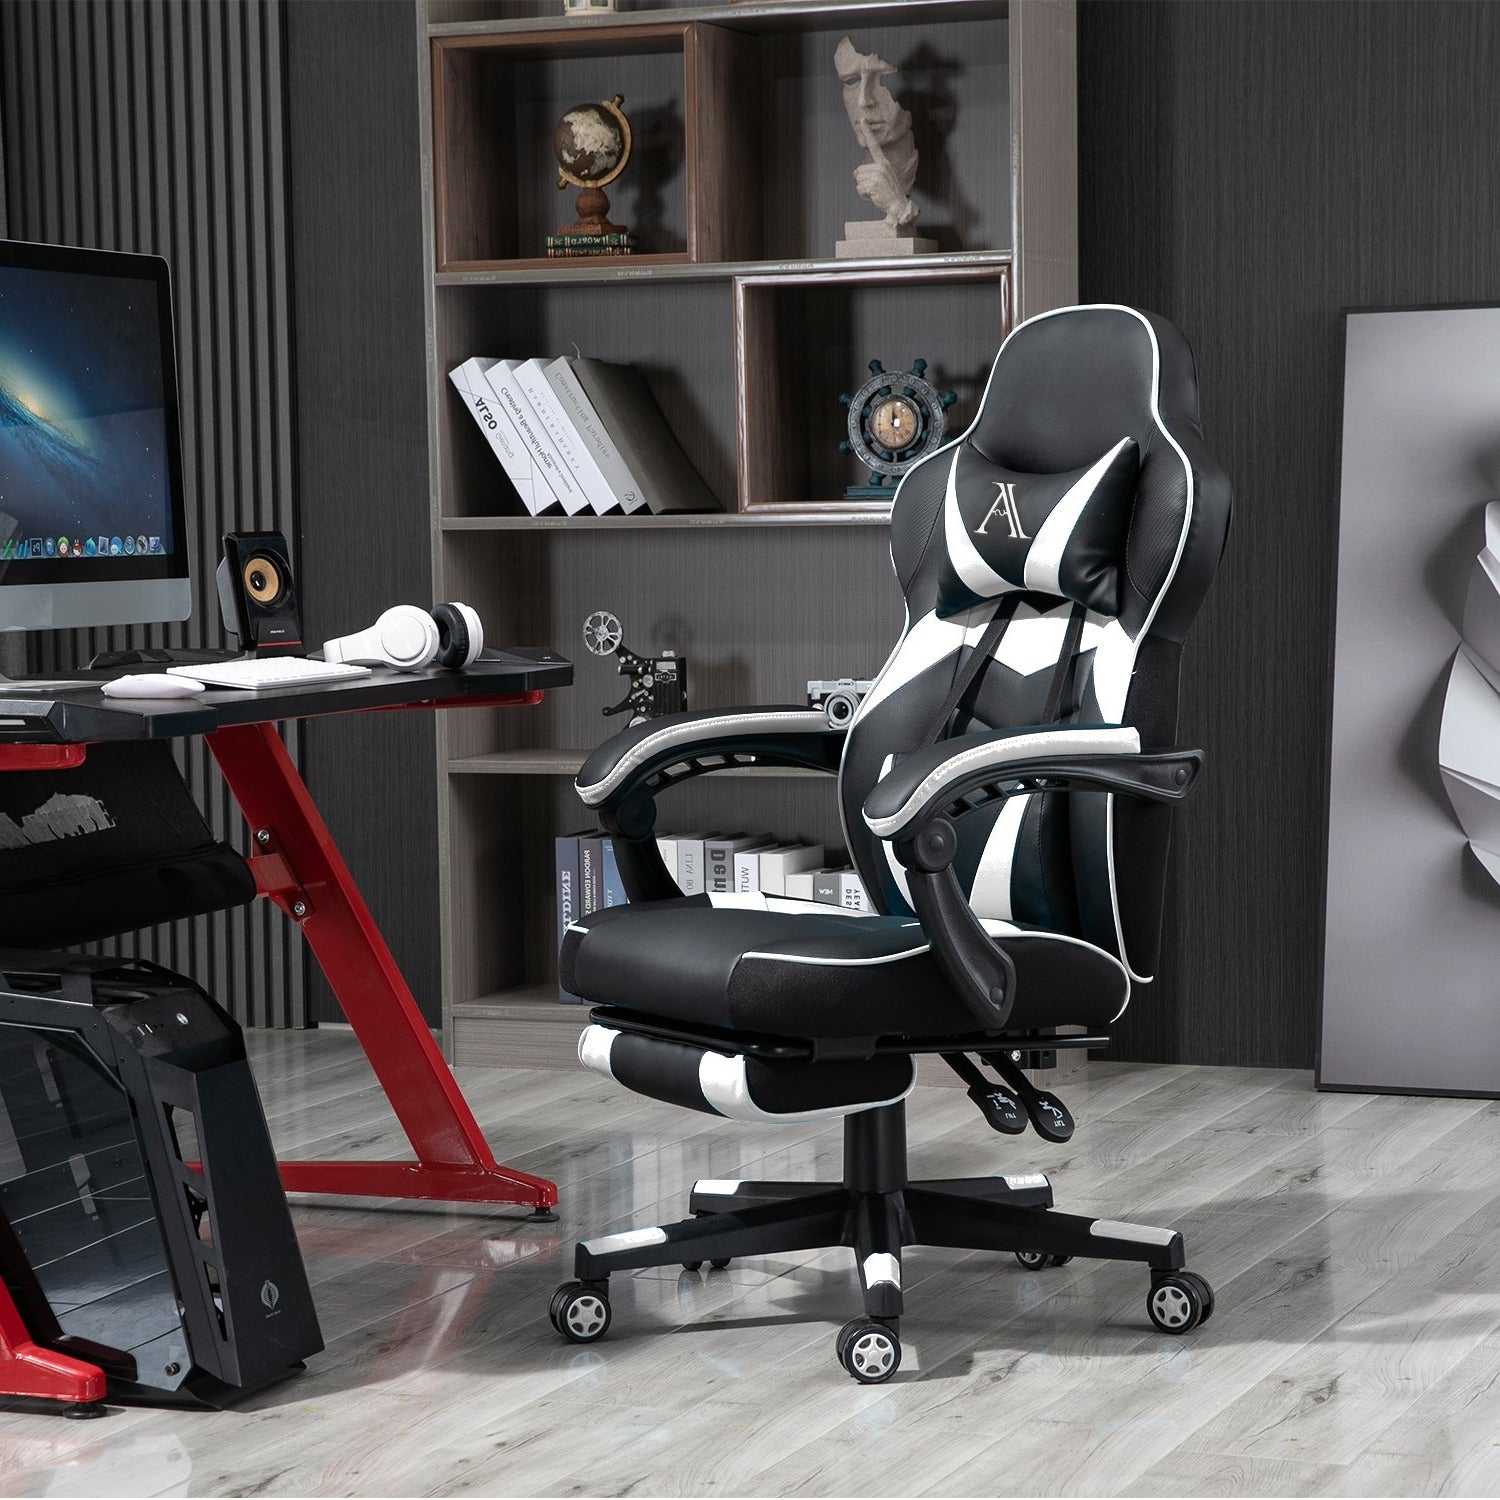 YAMASORO Racer Ergonomic PC Gaming Chair Adjuastable Leather Reclining Office Chair With Footrest (8264)